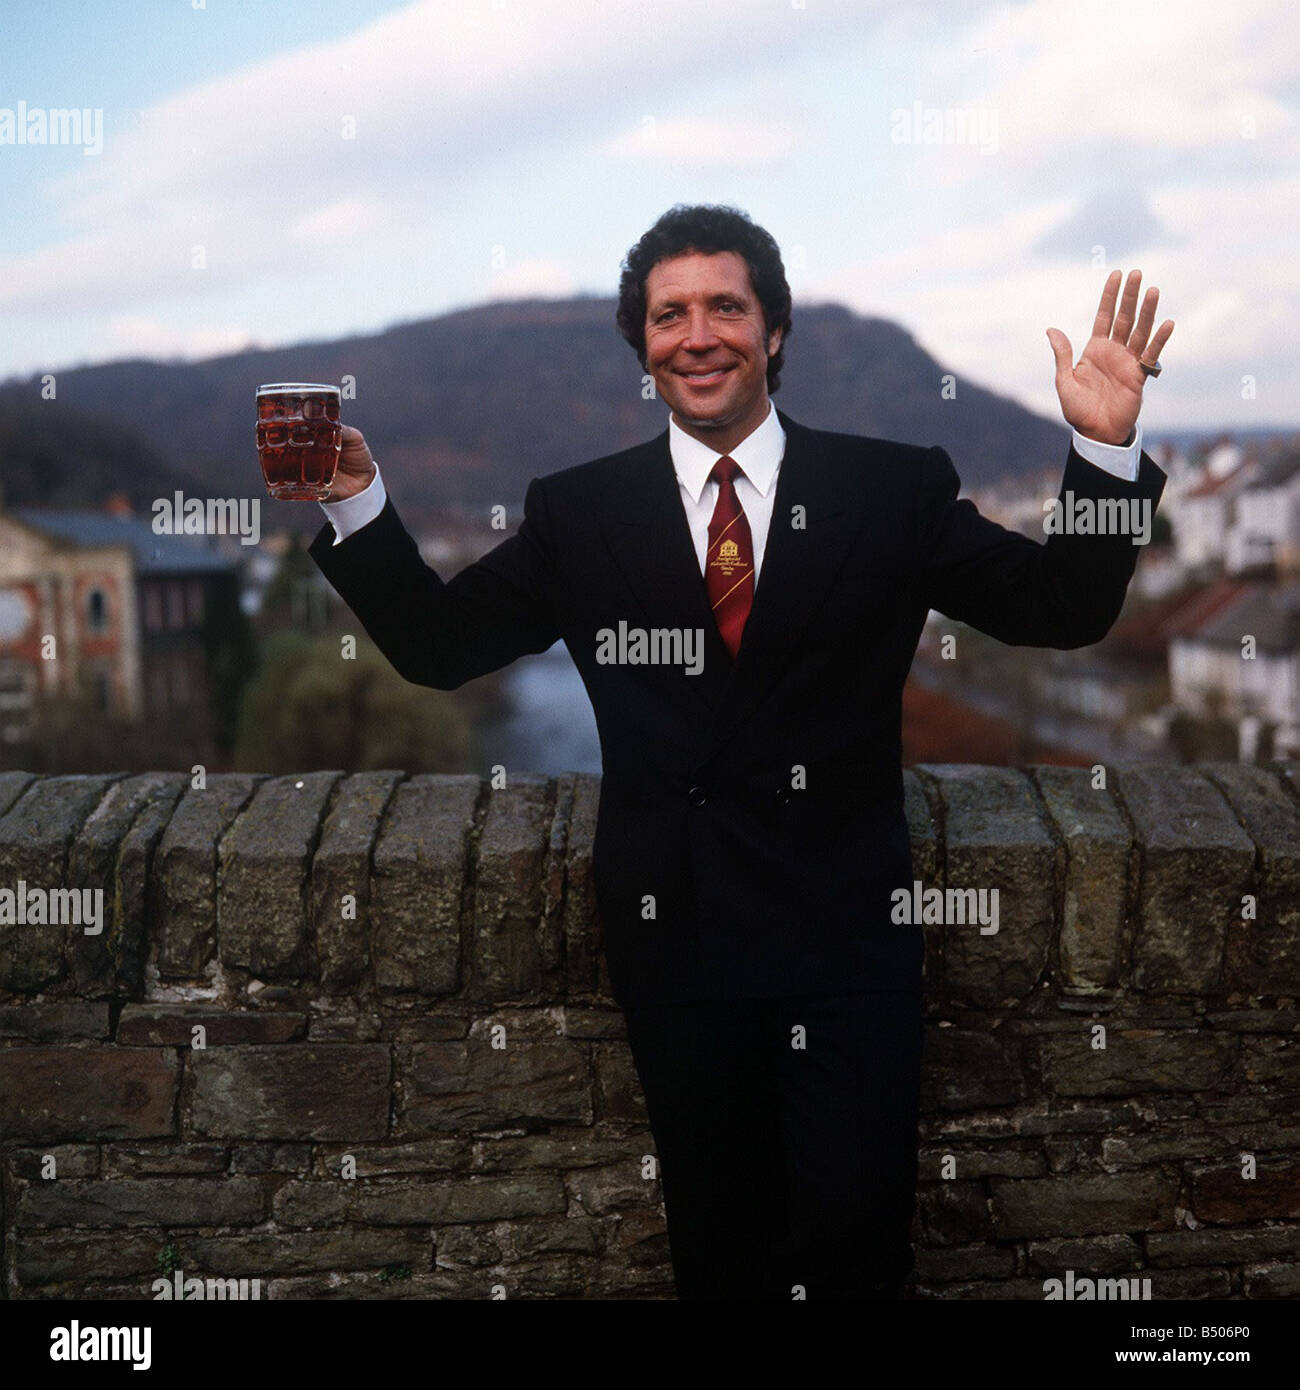 Tom Jones Singer in his home town in Wales standing by brick wall holding pint glass of beer Stock Photo